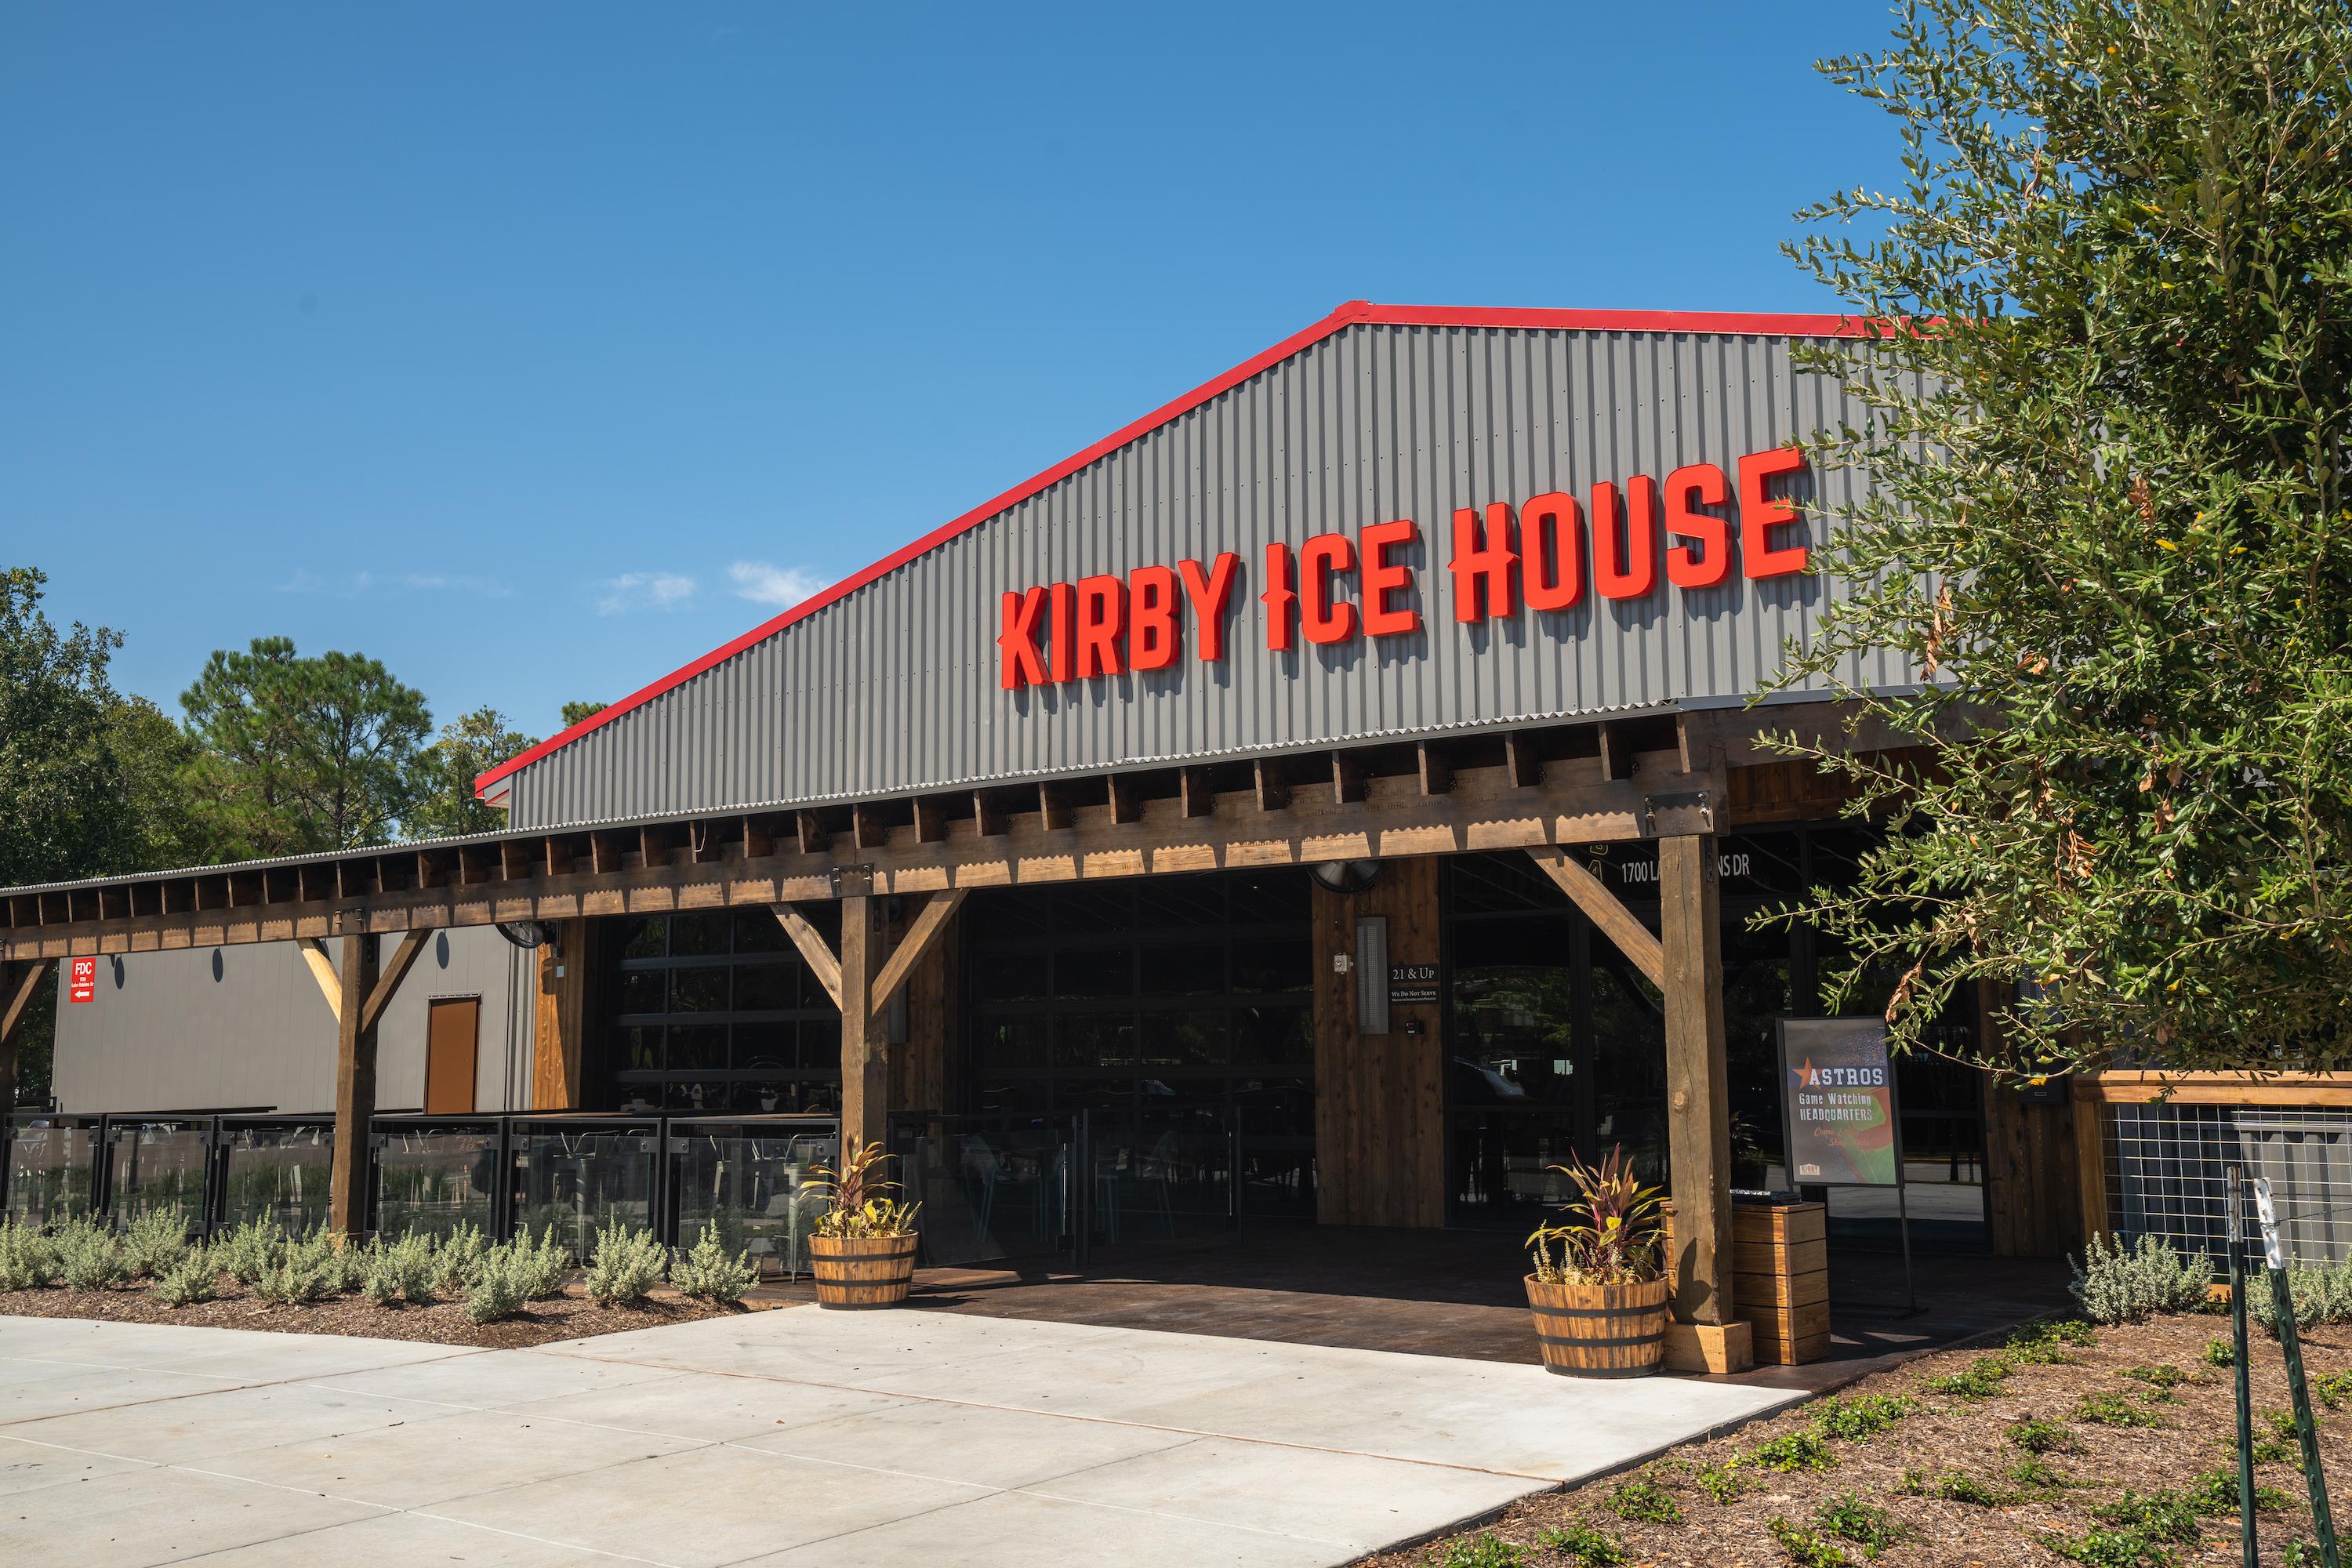 LOCATIONS - KIRBY ICE HOUSE